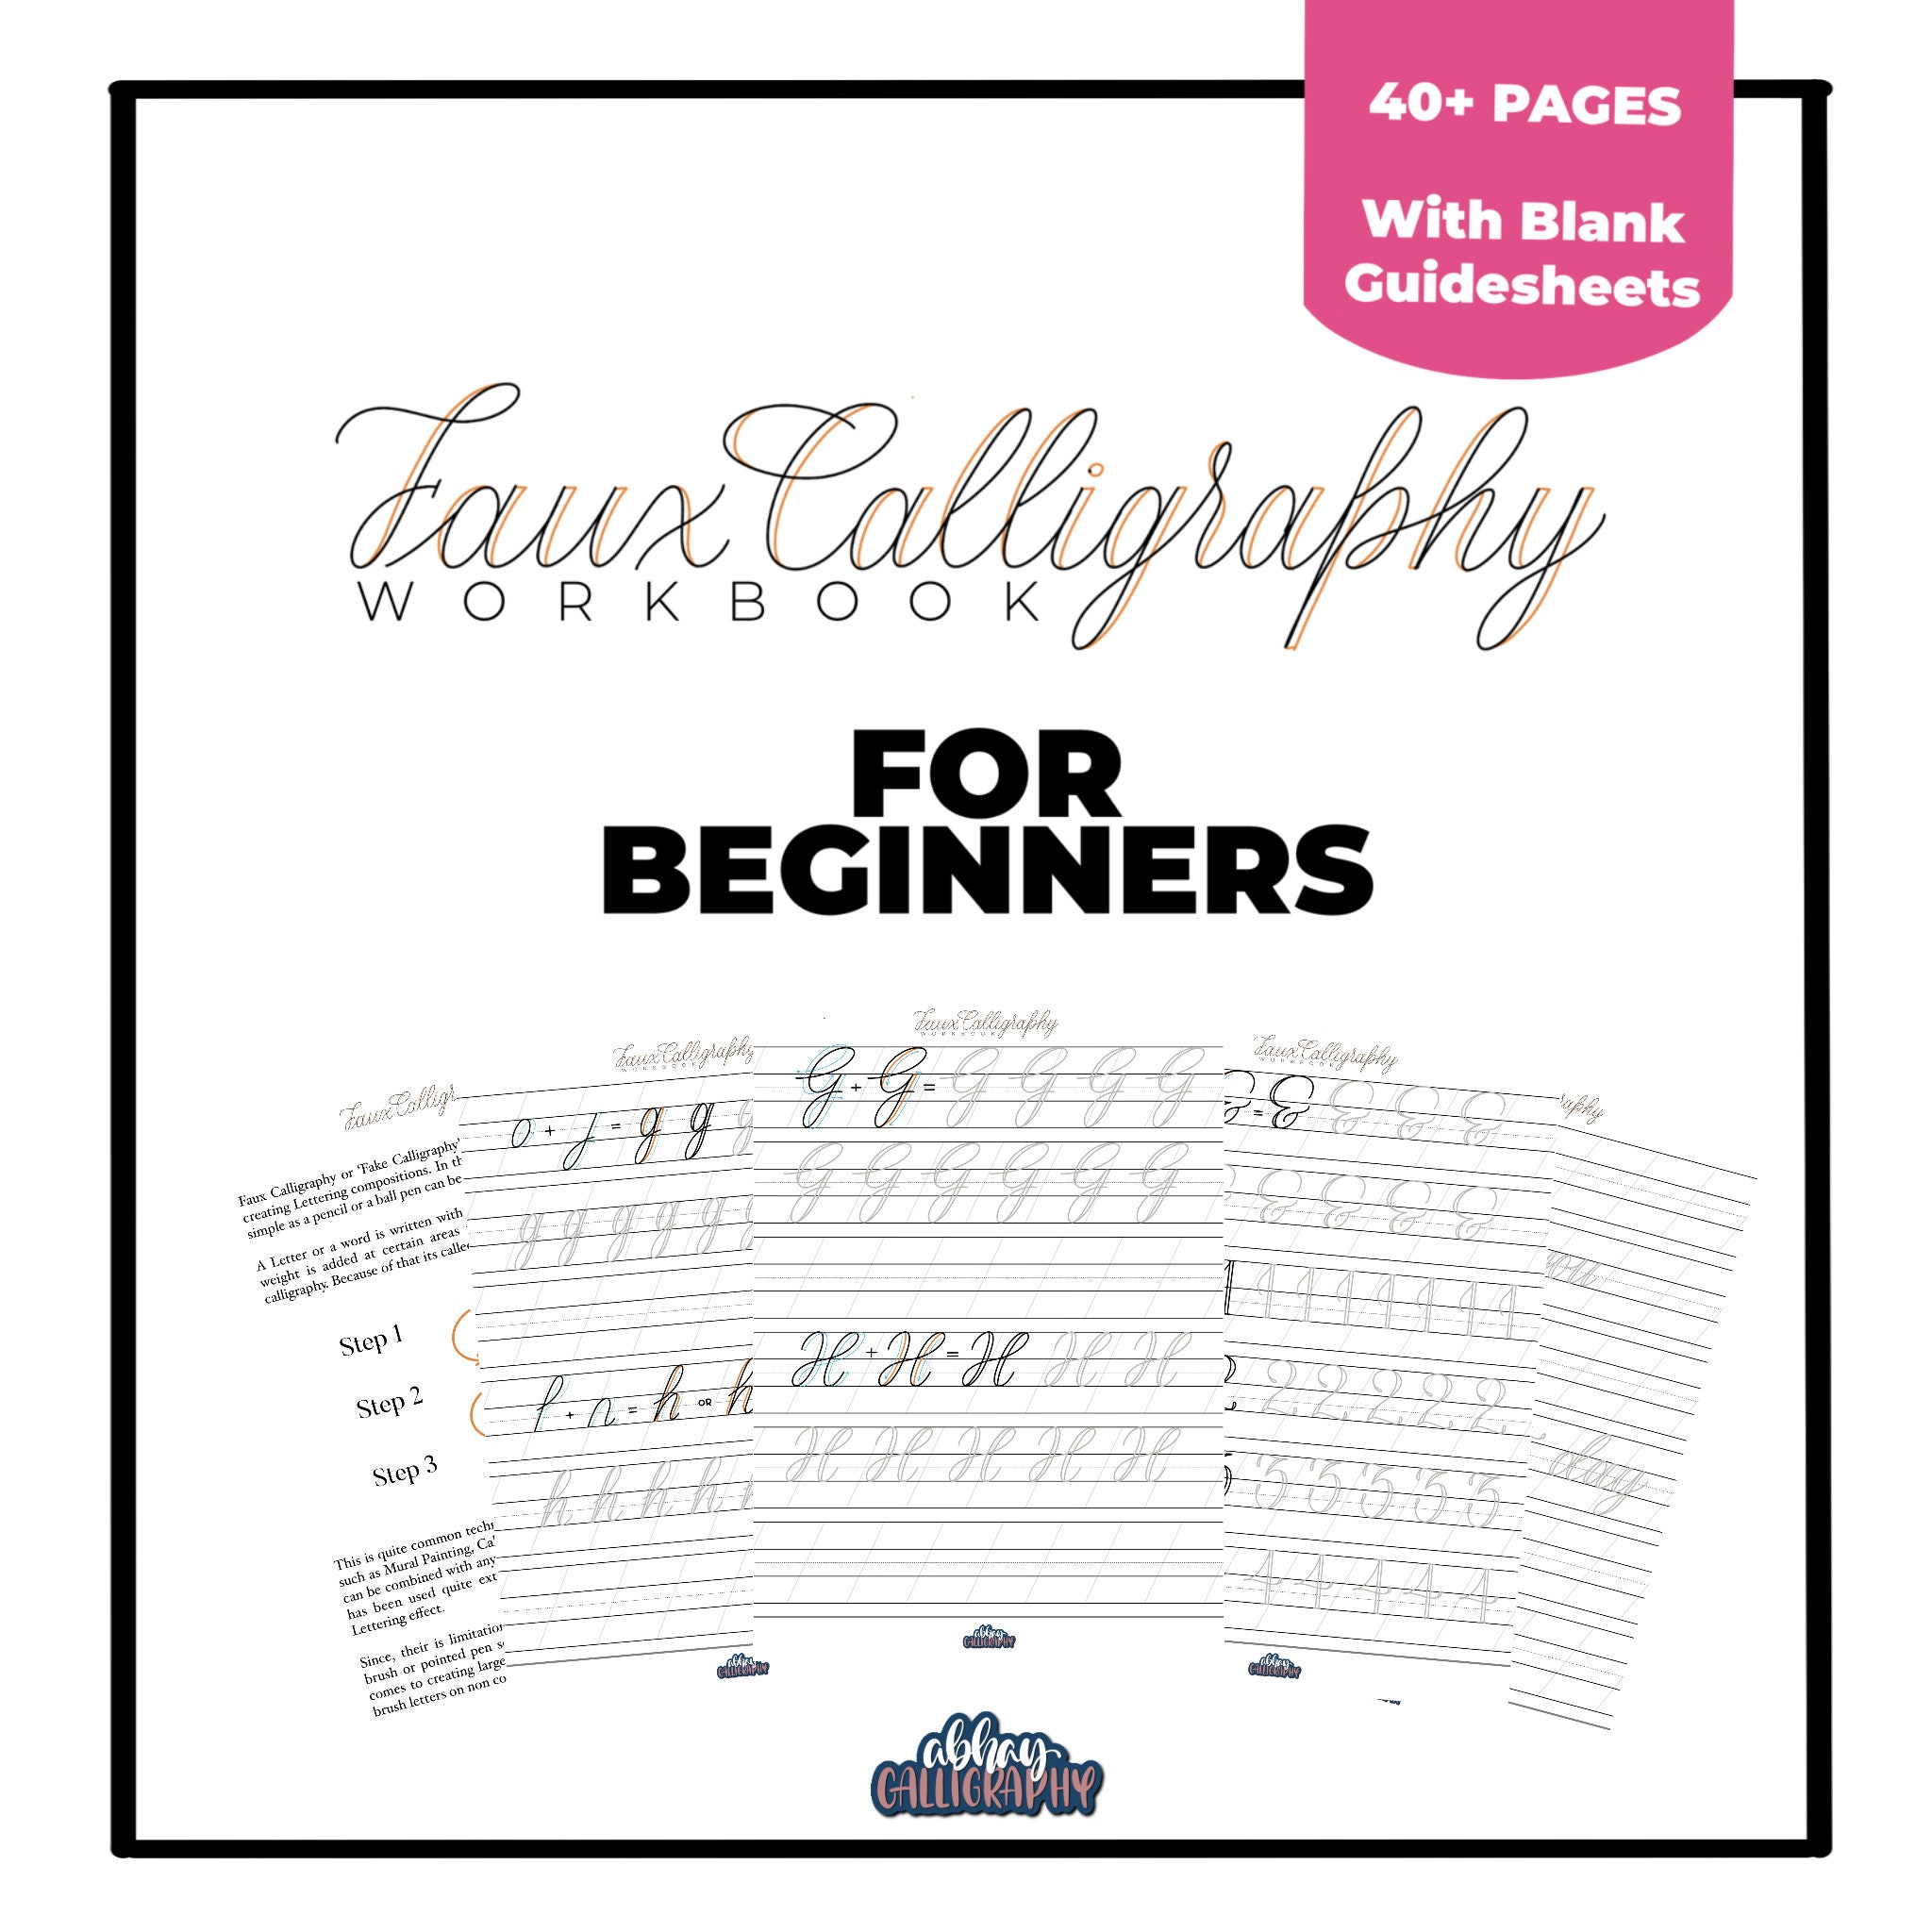 Calligraphy Workbook: Calligraphy Writing Paper and Workbook for